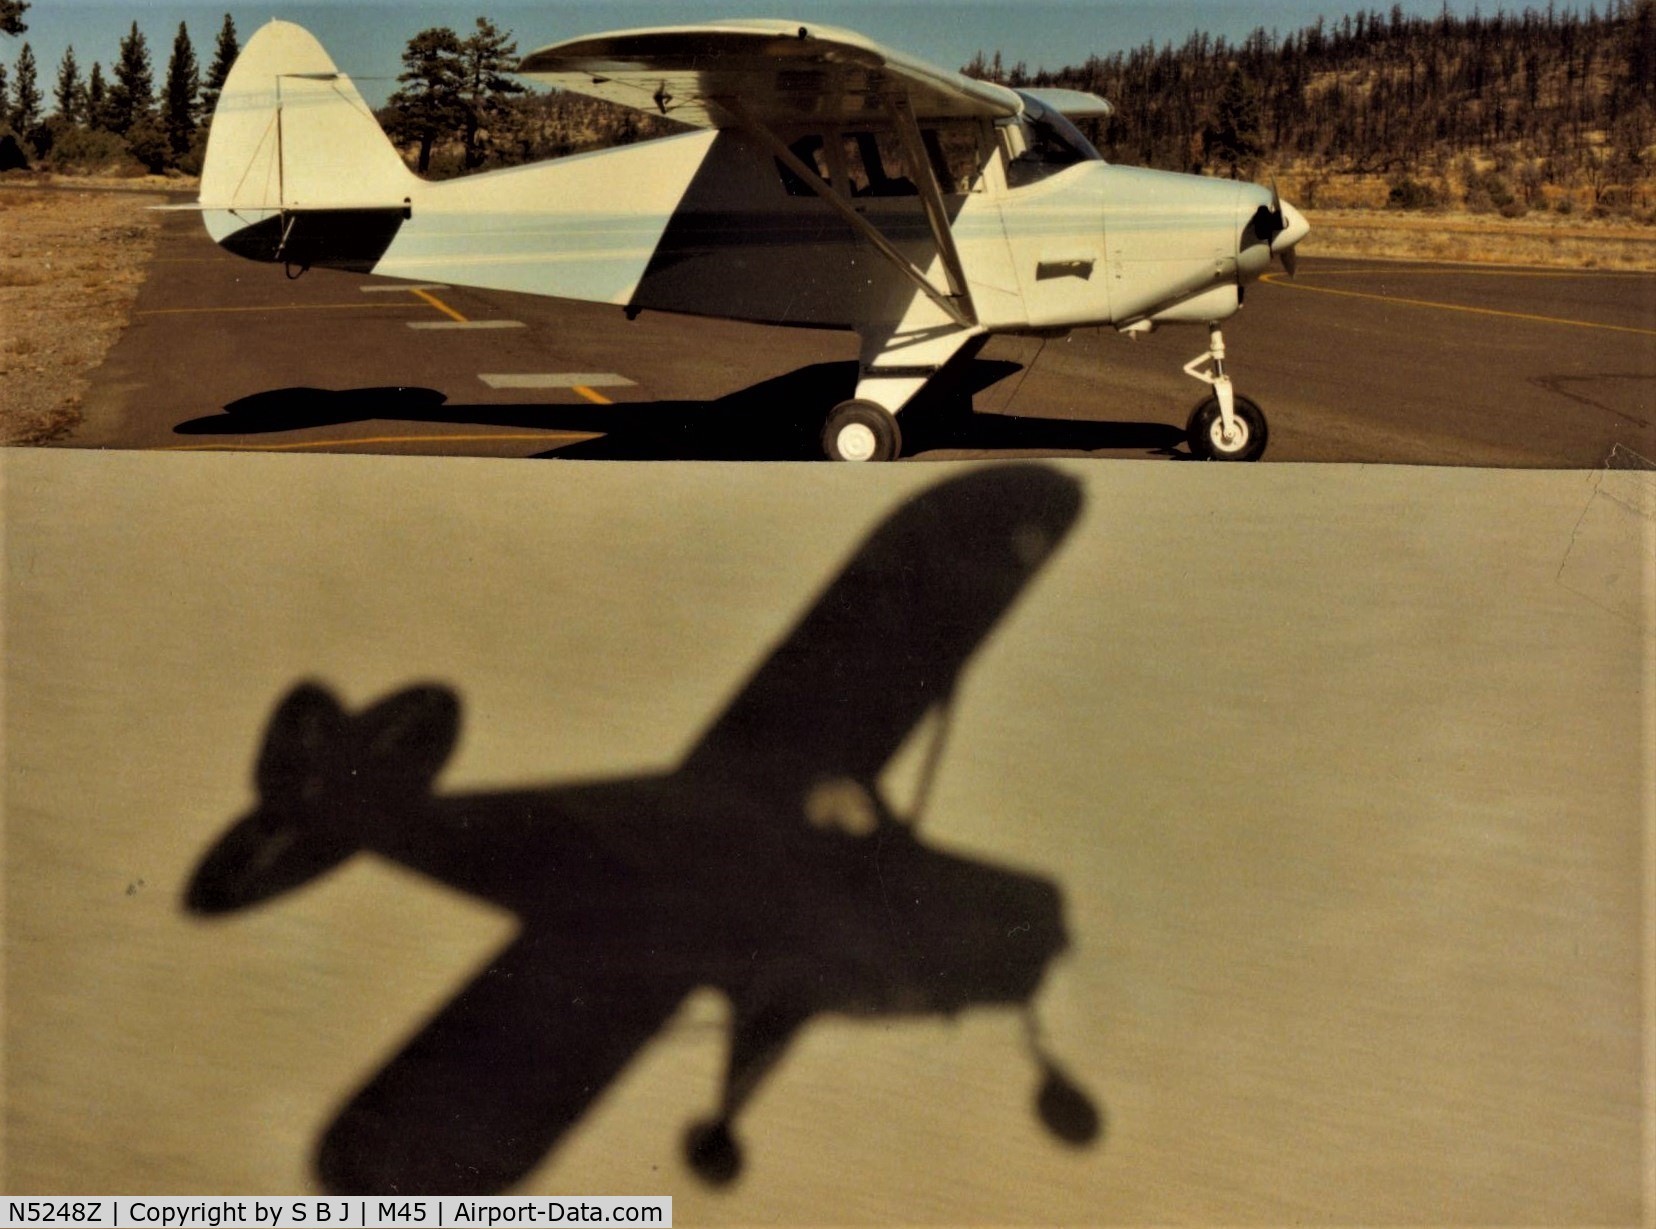 N5248Z, 1961 Piper PA-22-108 Colt C/N 22-8931, 48Z at Alpine County airport and a picture of its ever present shadow taken later the same day over a dry lake in the Mojave desert in Calif. Talk about a magic carpet!